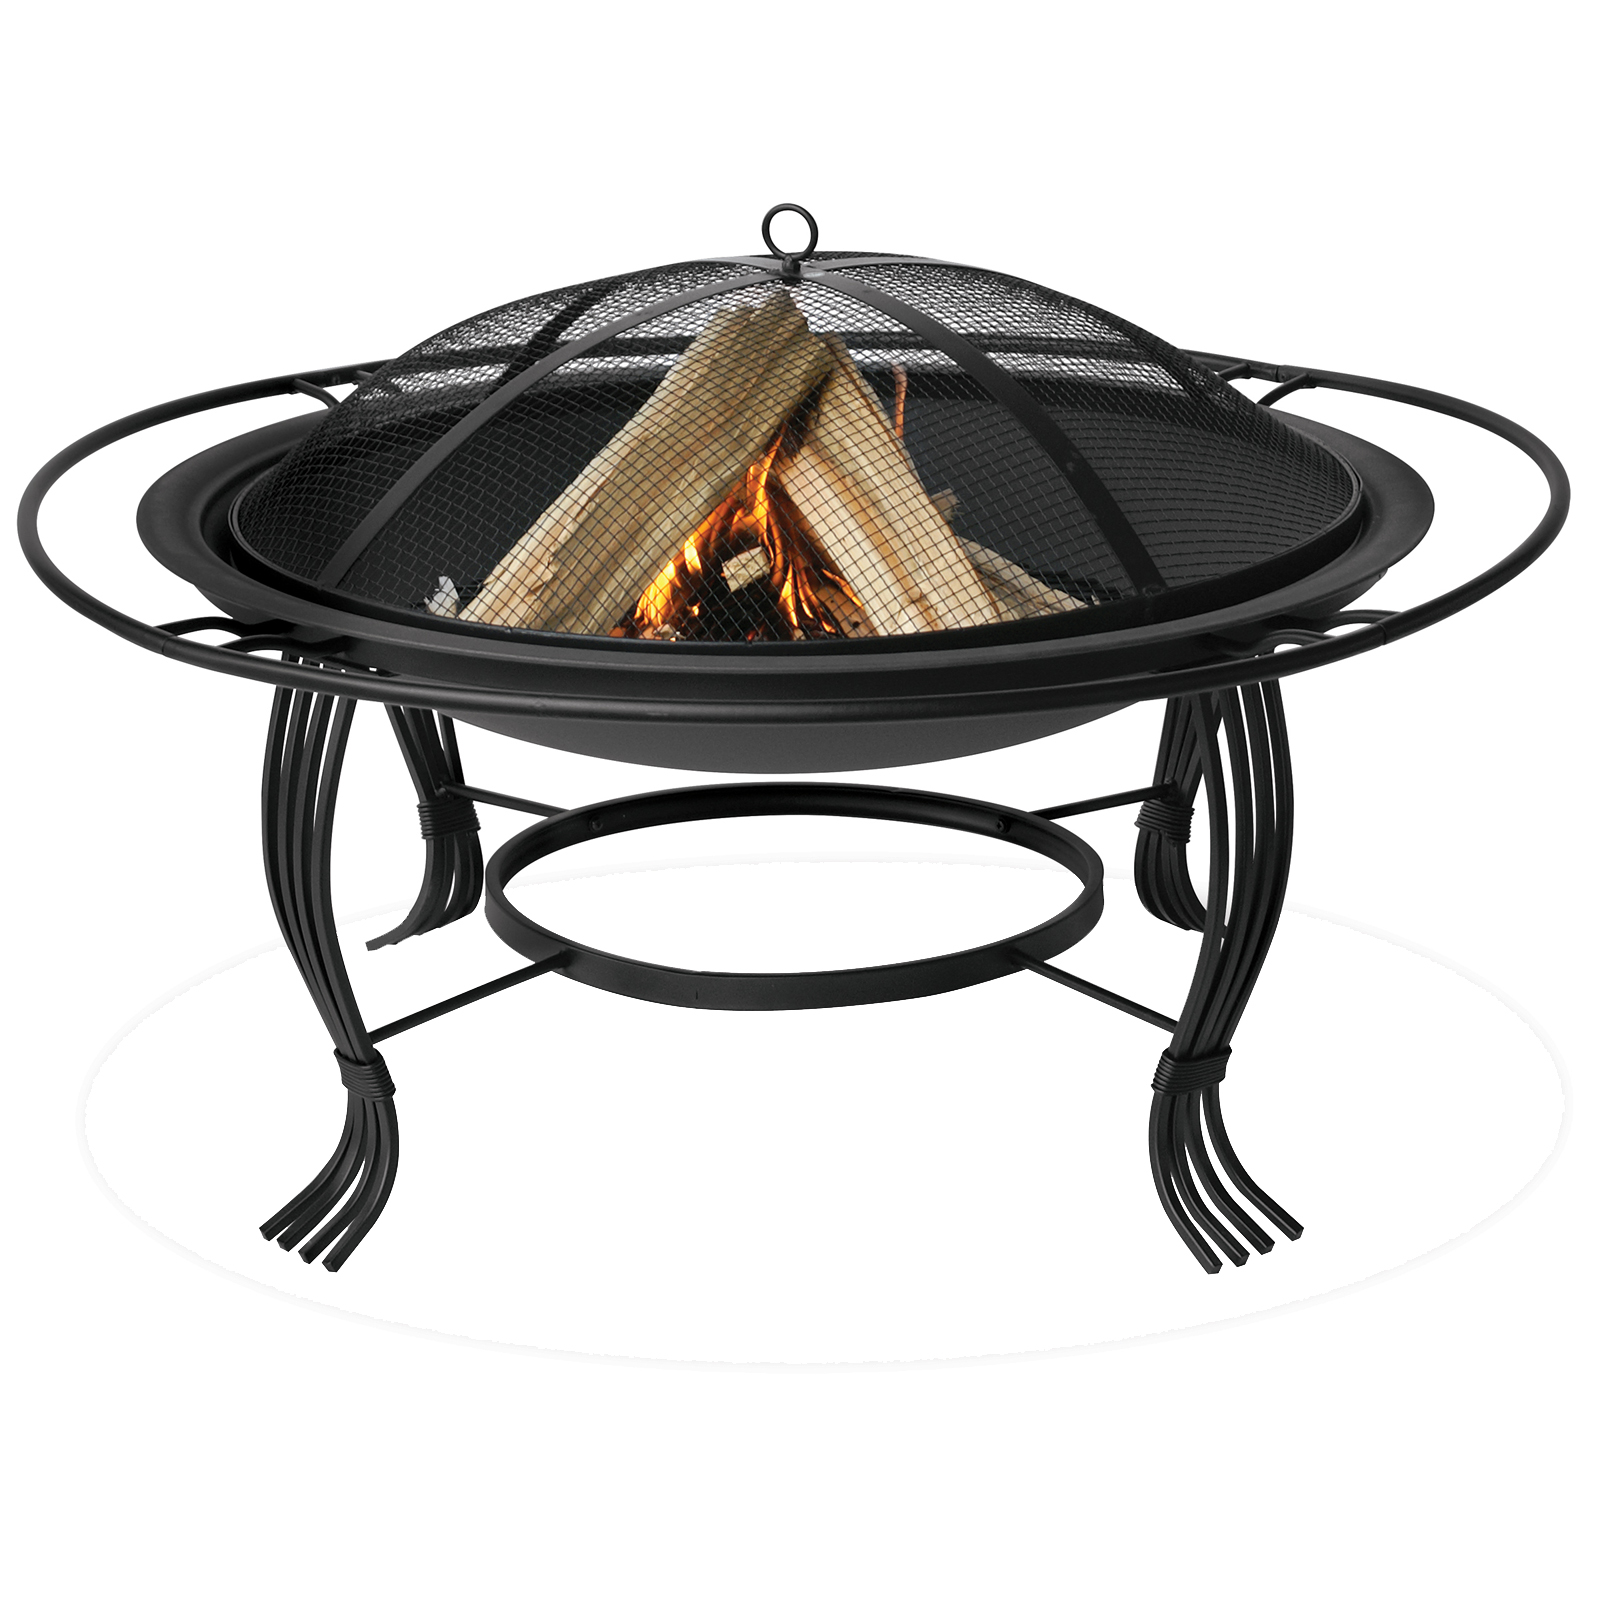 UniFlame Black Outdoor Firebowl With Outer Ring *Limited Availability